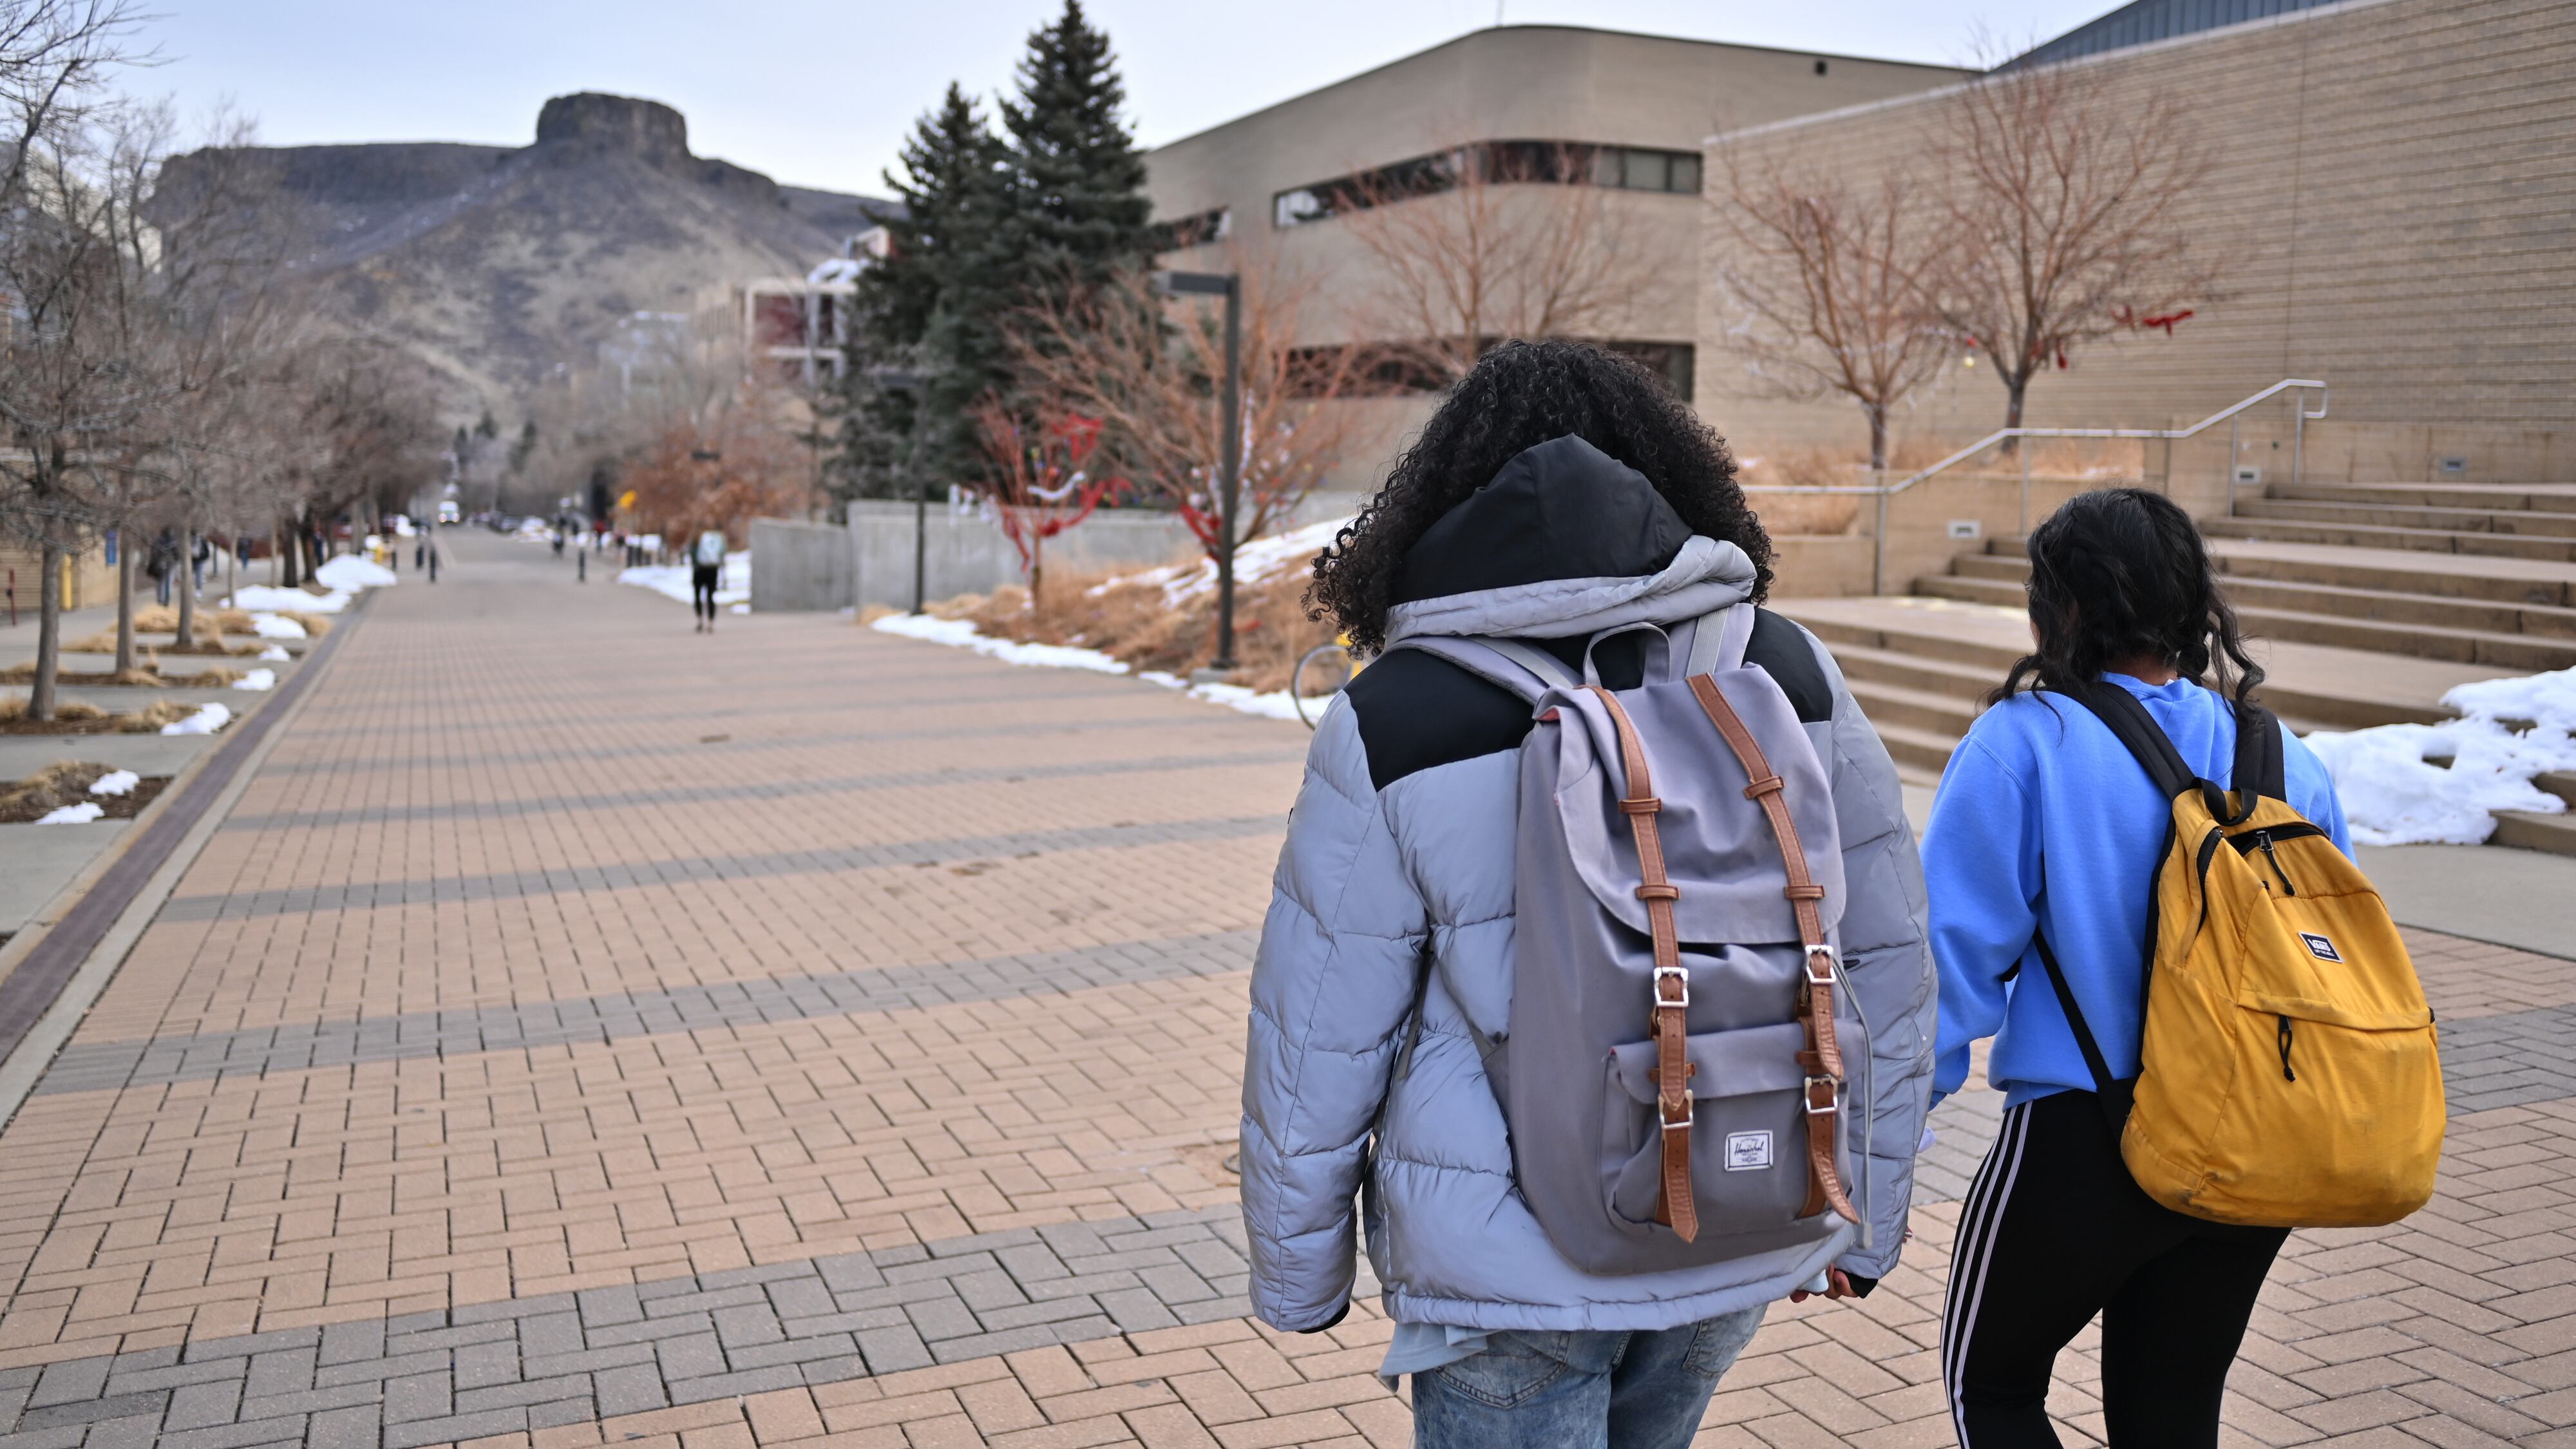 Two students with backpacks on walk on on a college campus with a mountain in the background.